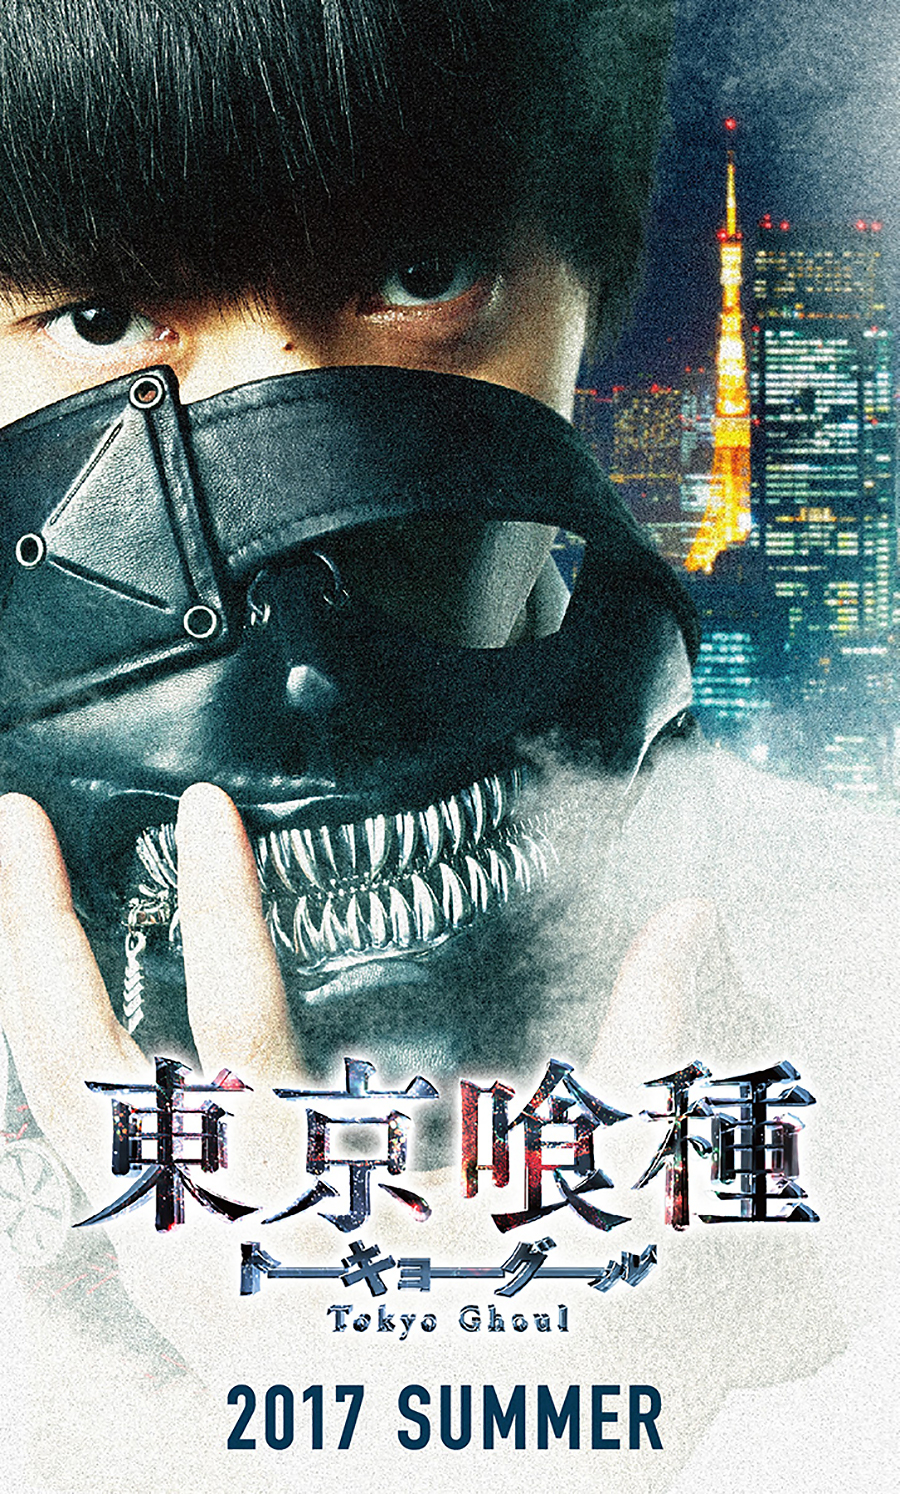 Tokyo Ghoul live-action